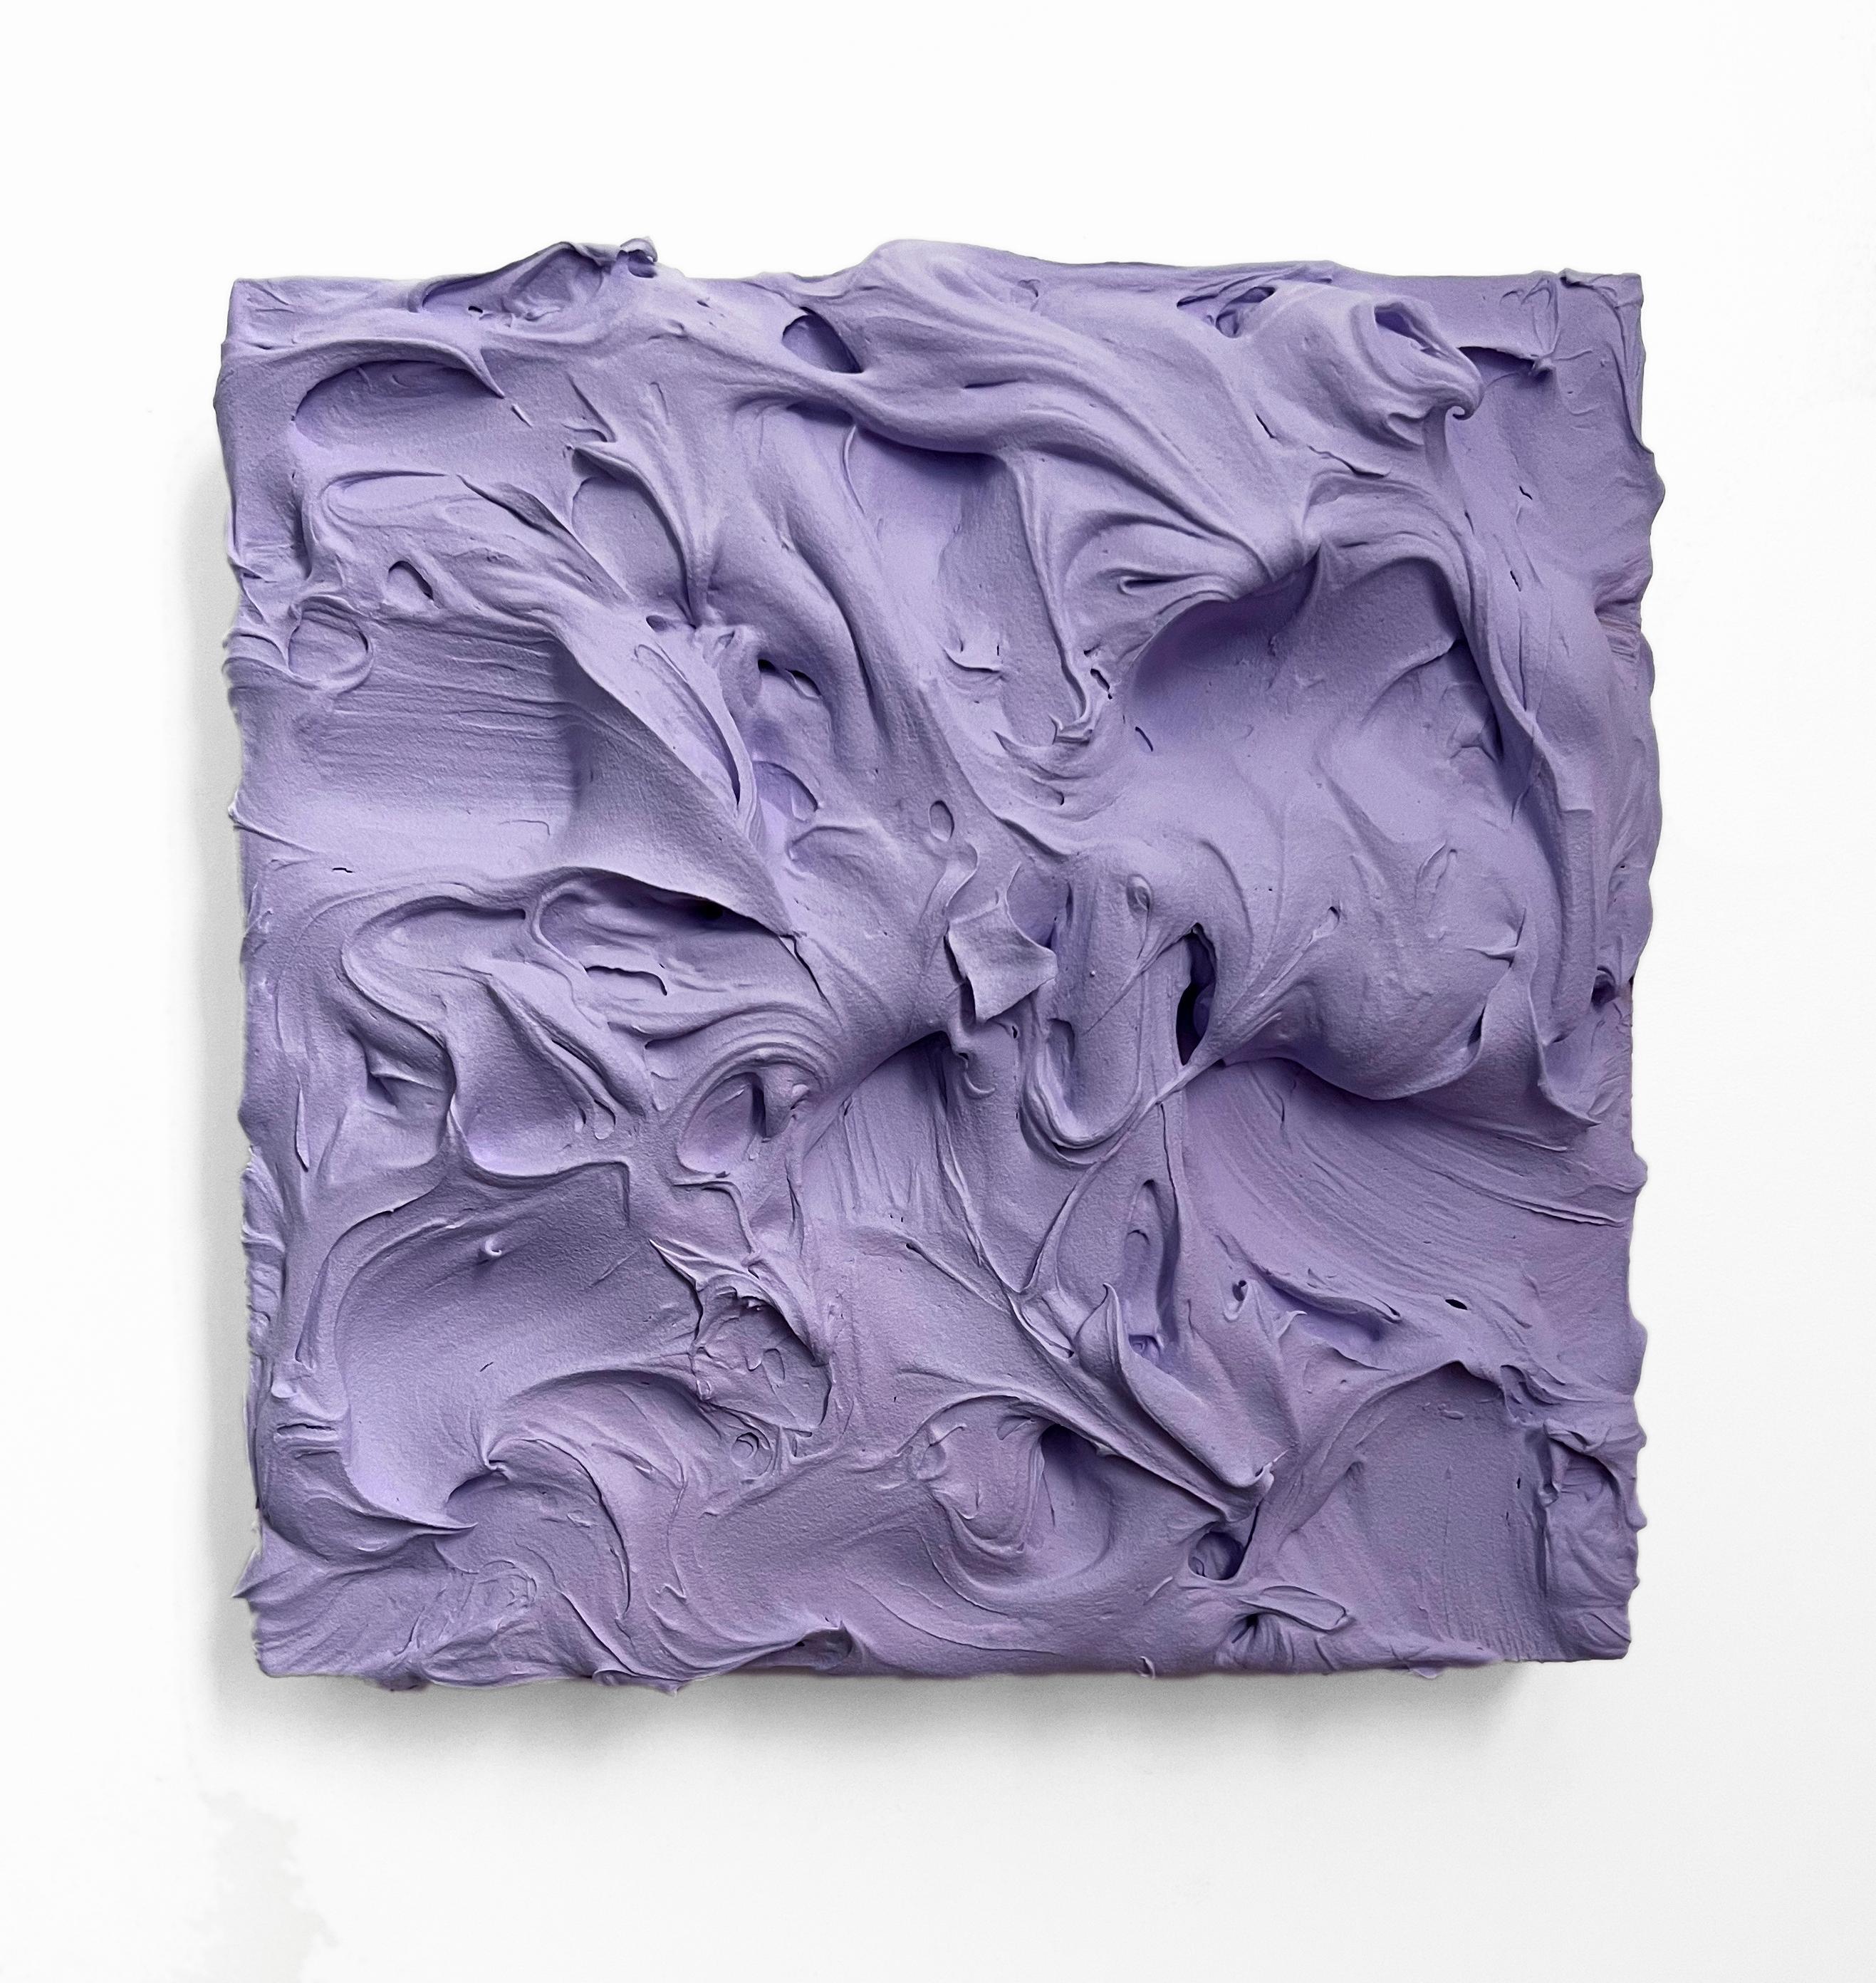 "Pale Amethyst Excess" Wall Sculpture monochrome monochromatic mid century lilac - Mixed Media Art by Chloe Hedden